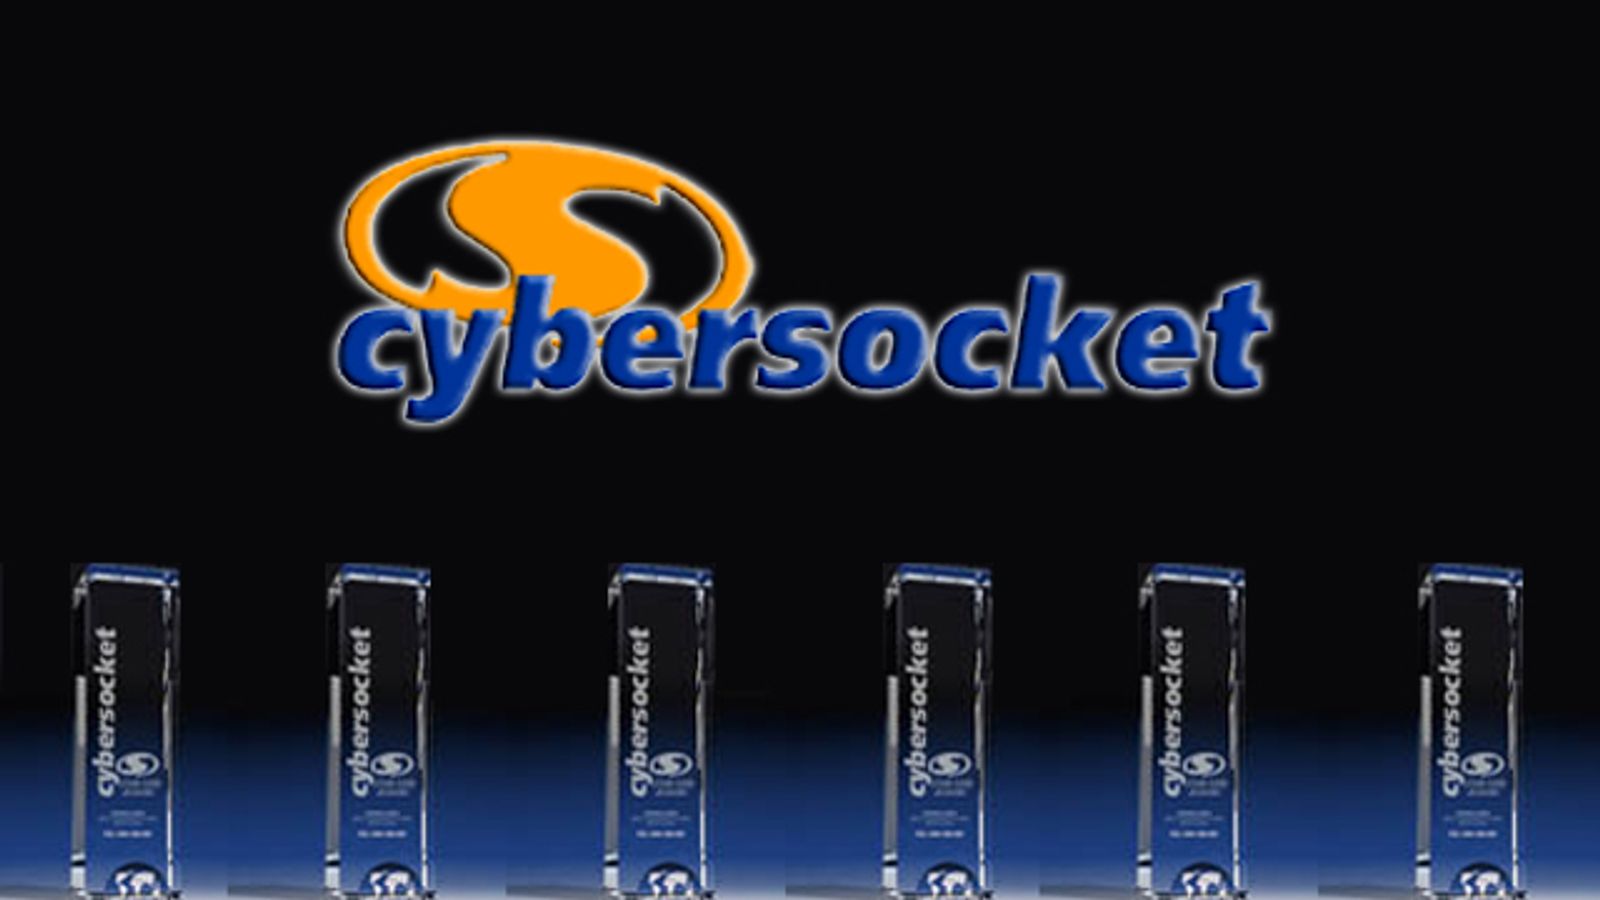 11th Annual Cybersocket Web Awards Nominations Open